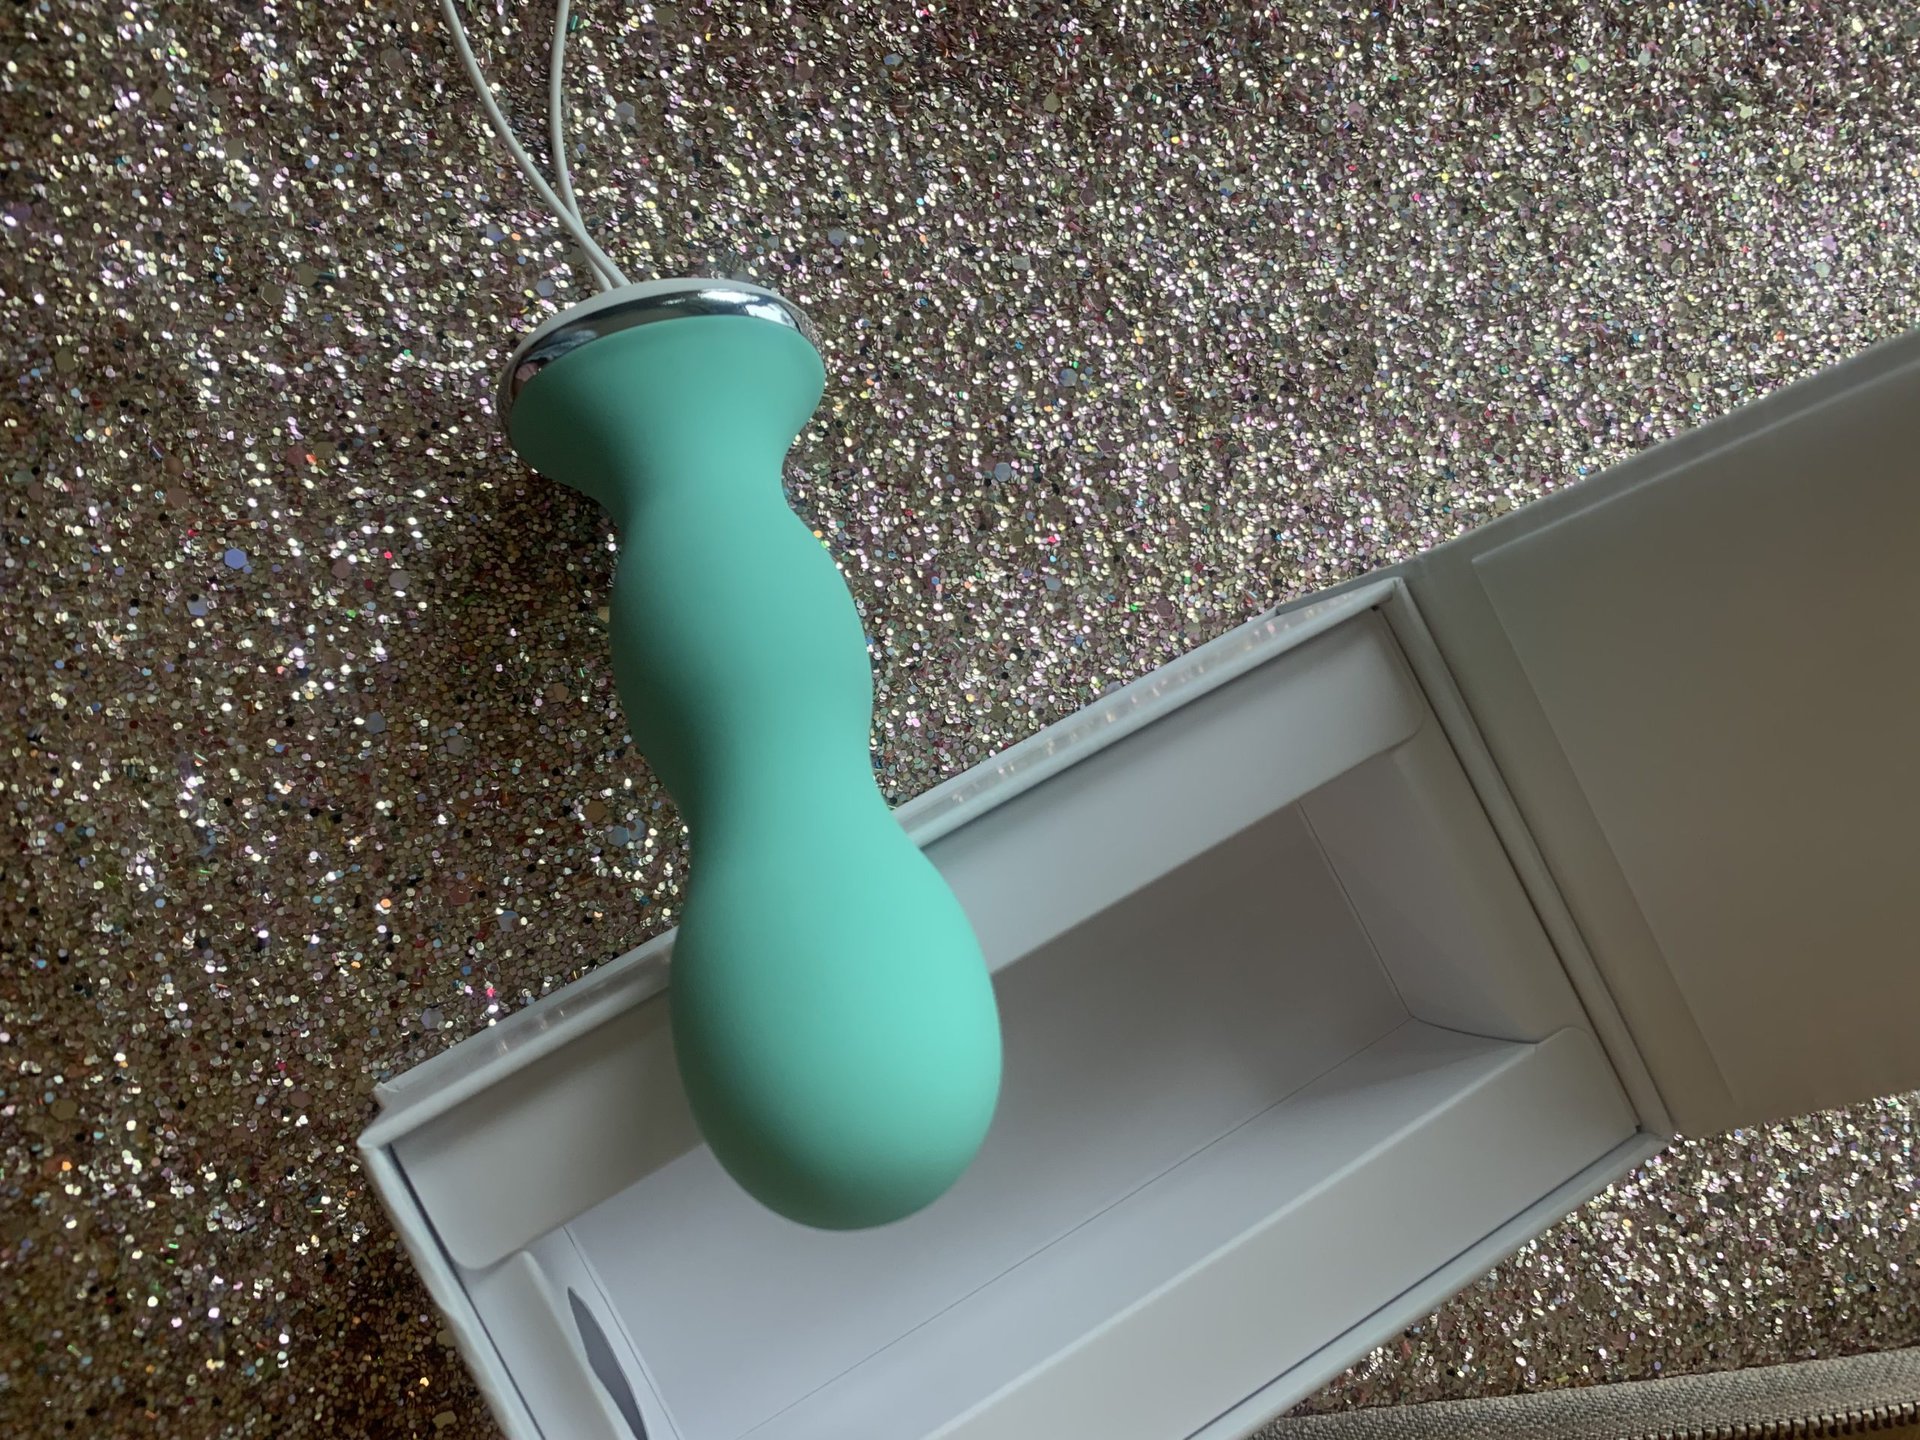 A teal Perifit kegel exerciser in a box on a glittery surface.